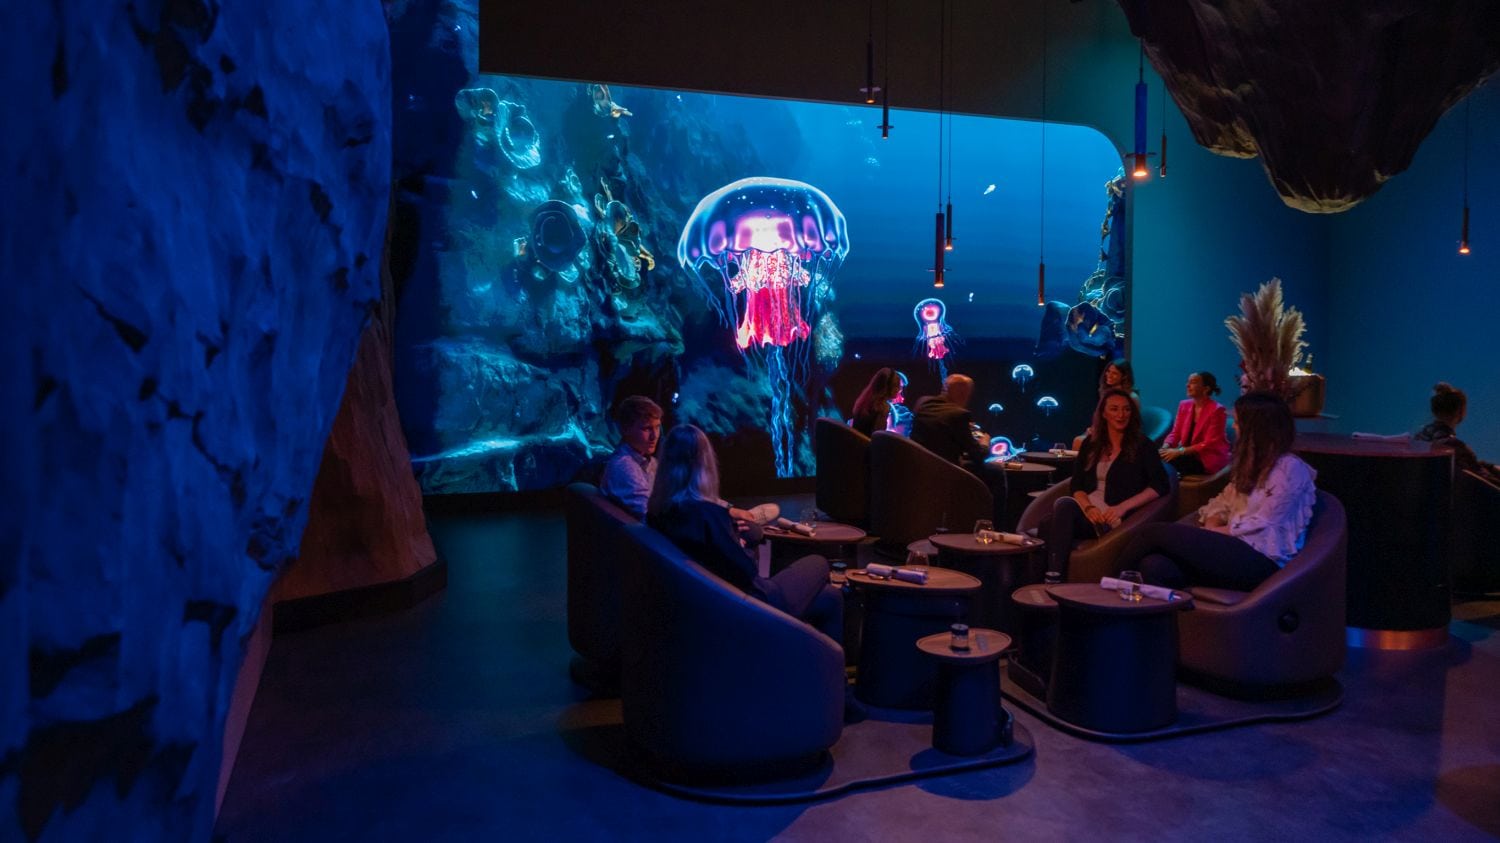 Guests eat in front of an underwater backdrop projected onto the wall in the "eatrenalin" gastronomy experience at Europa-Park in Baden-Württemberg